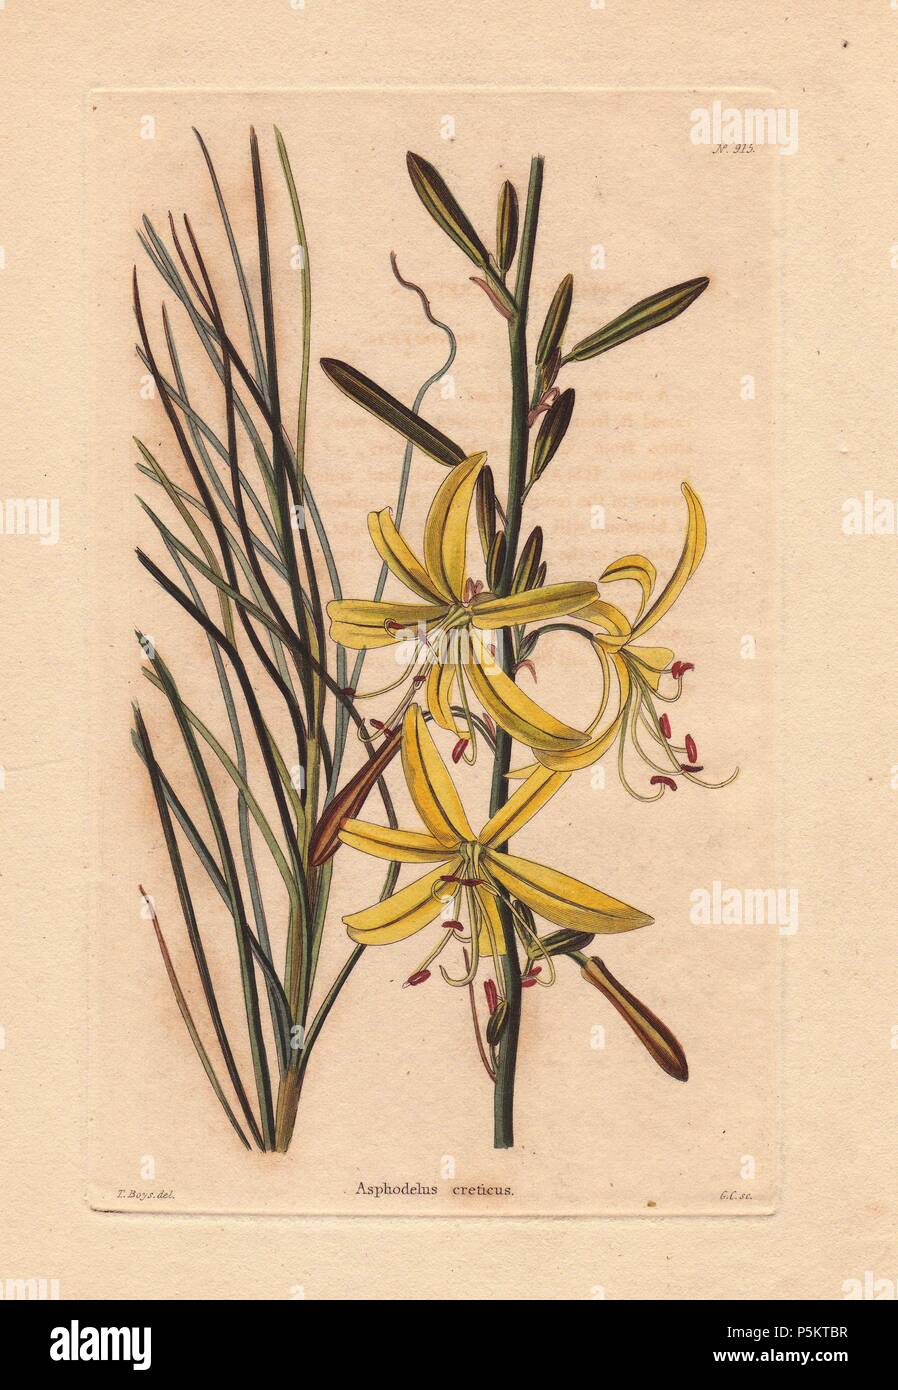 Asphodelus creticus. . Yellow asphodelus lily. Illustration by T. Boys, engraved by George Cooke.. . Conrad Loddiges and Sons published an illustrated catalogue of the nursery's plants entitled the Botanical Cabinet. The monthly magazine featured 10 hand-coloured illustrations and ran from 1817 to 1833 to total 2,000 plates. The publication introduced many exquisite camellias from China, exotic orchids and lilies from the New World, and about 100 varieties of heaths from South Africa, which were currently in vogue. (The Victorian era saw a series of manias for flowers - from roses and camellia Stock Photo